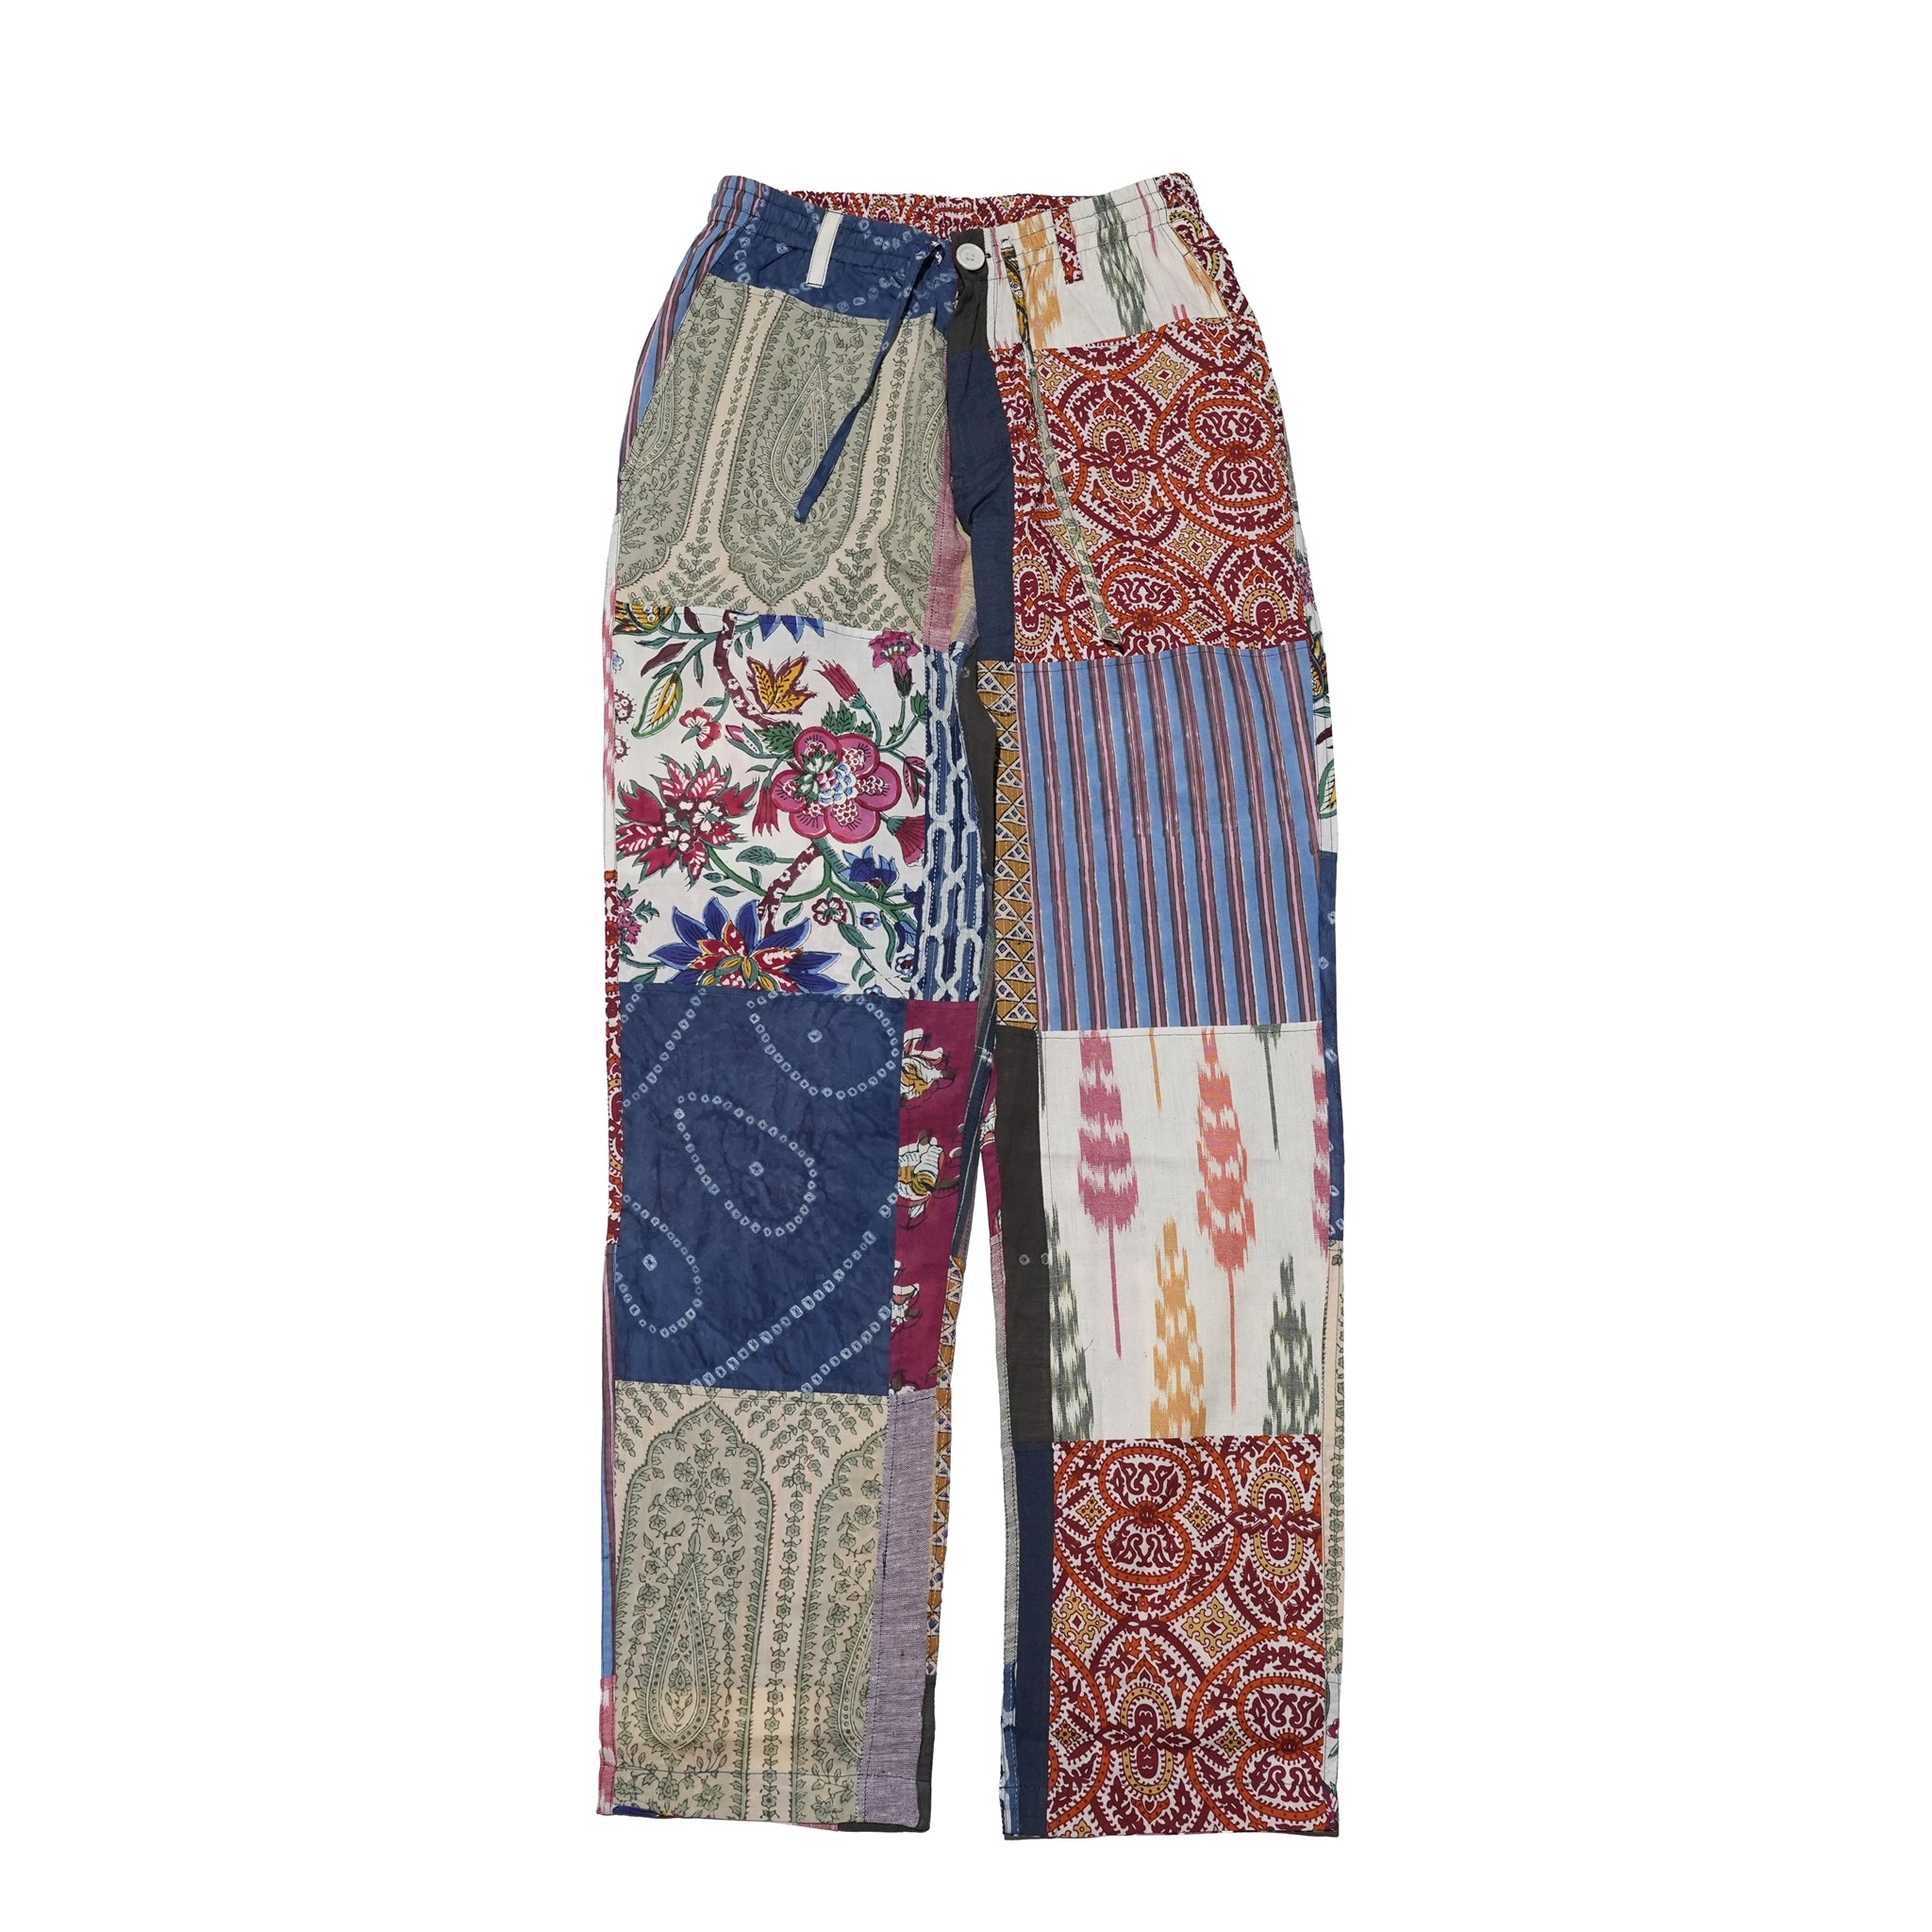 No:LISBOA_patch | Name:RELAXED FIT ELASTIC WAIST | Color:Patchwork 05【KARDO_カルド】